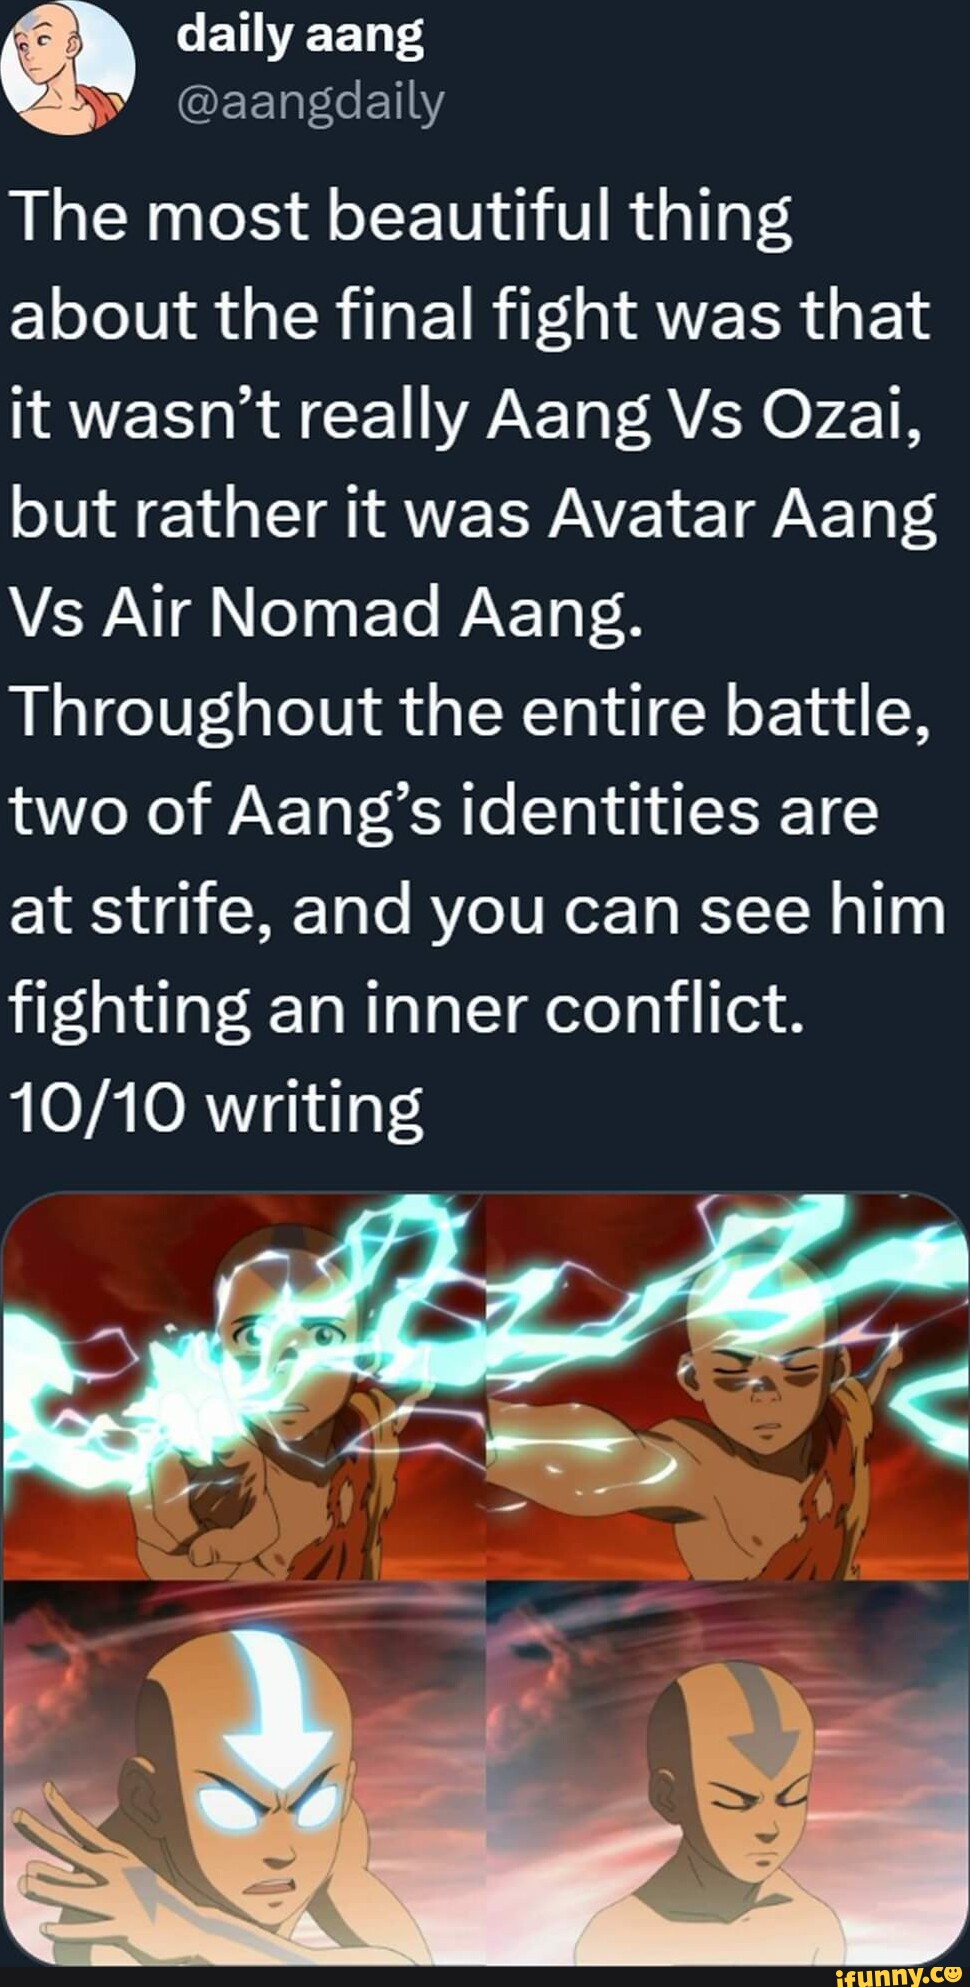 It's pretty unbelievable how the final battle of the Avatar series